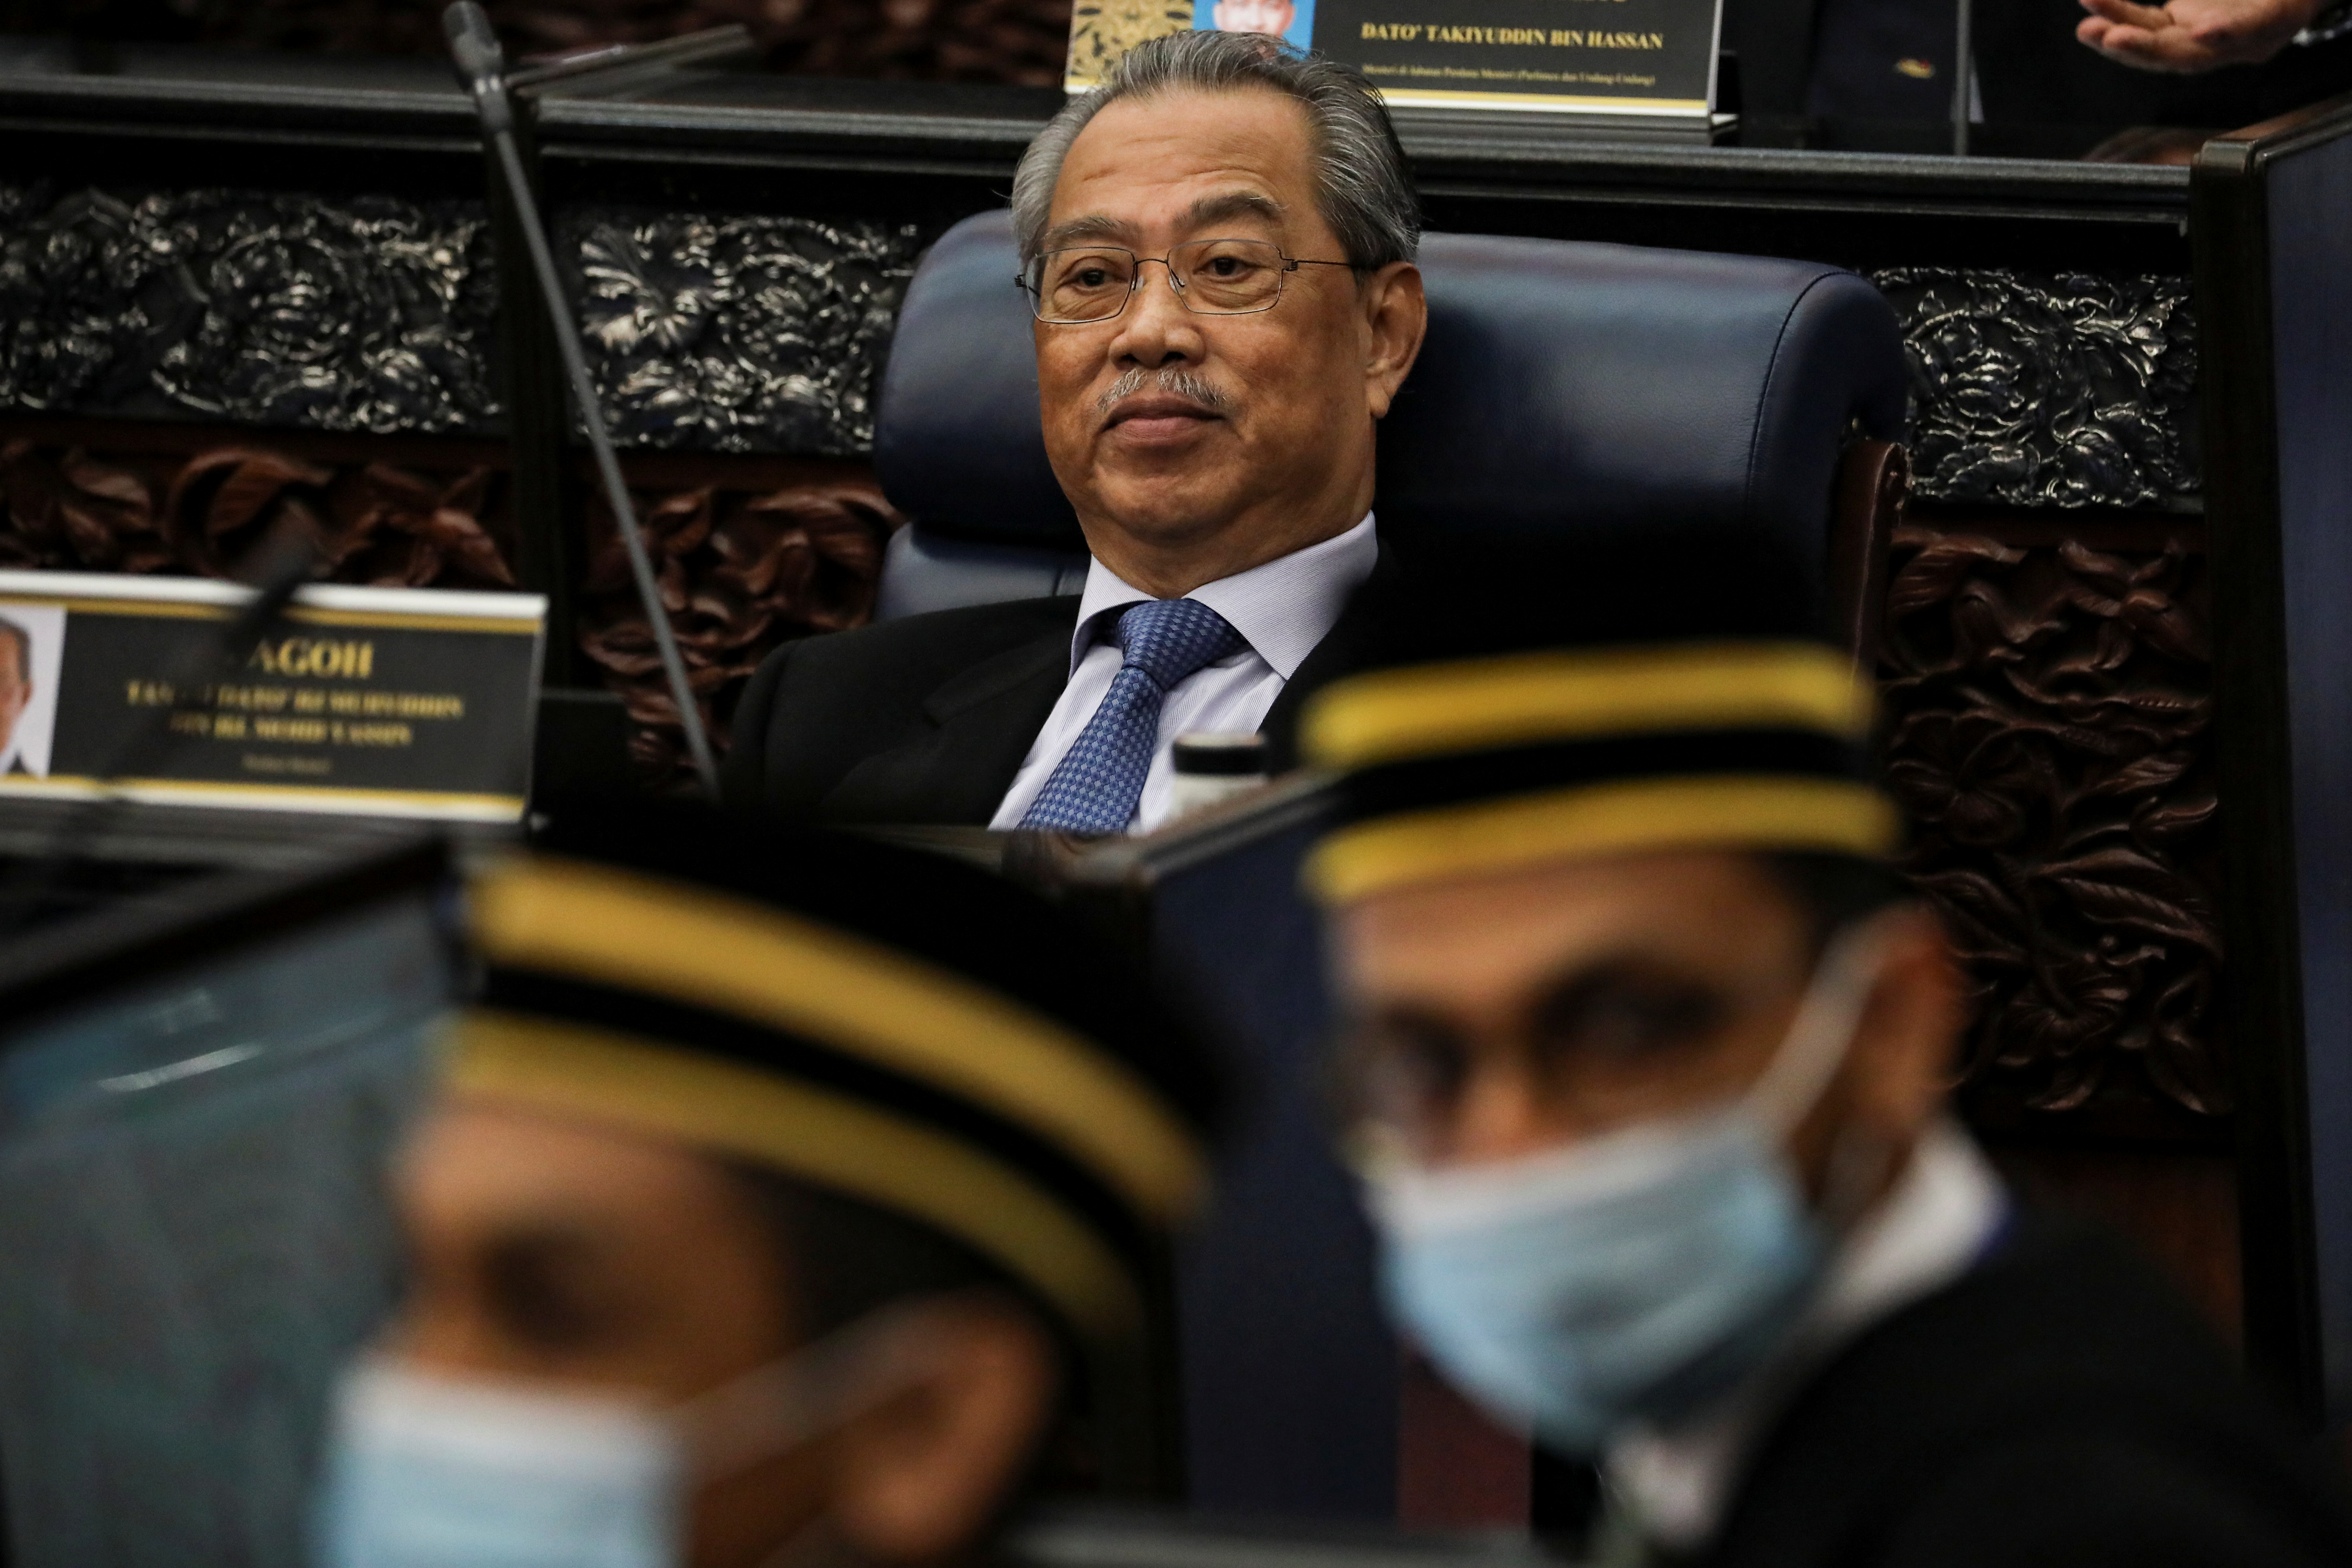 Malaysia's Prime Minister Muhyiddin Yassin reacts during a session of the lower house of parliament, in Kuala Lumpur